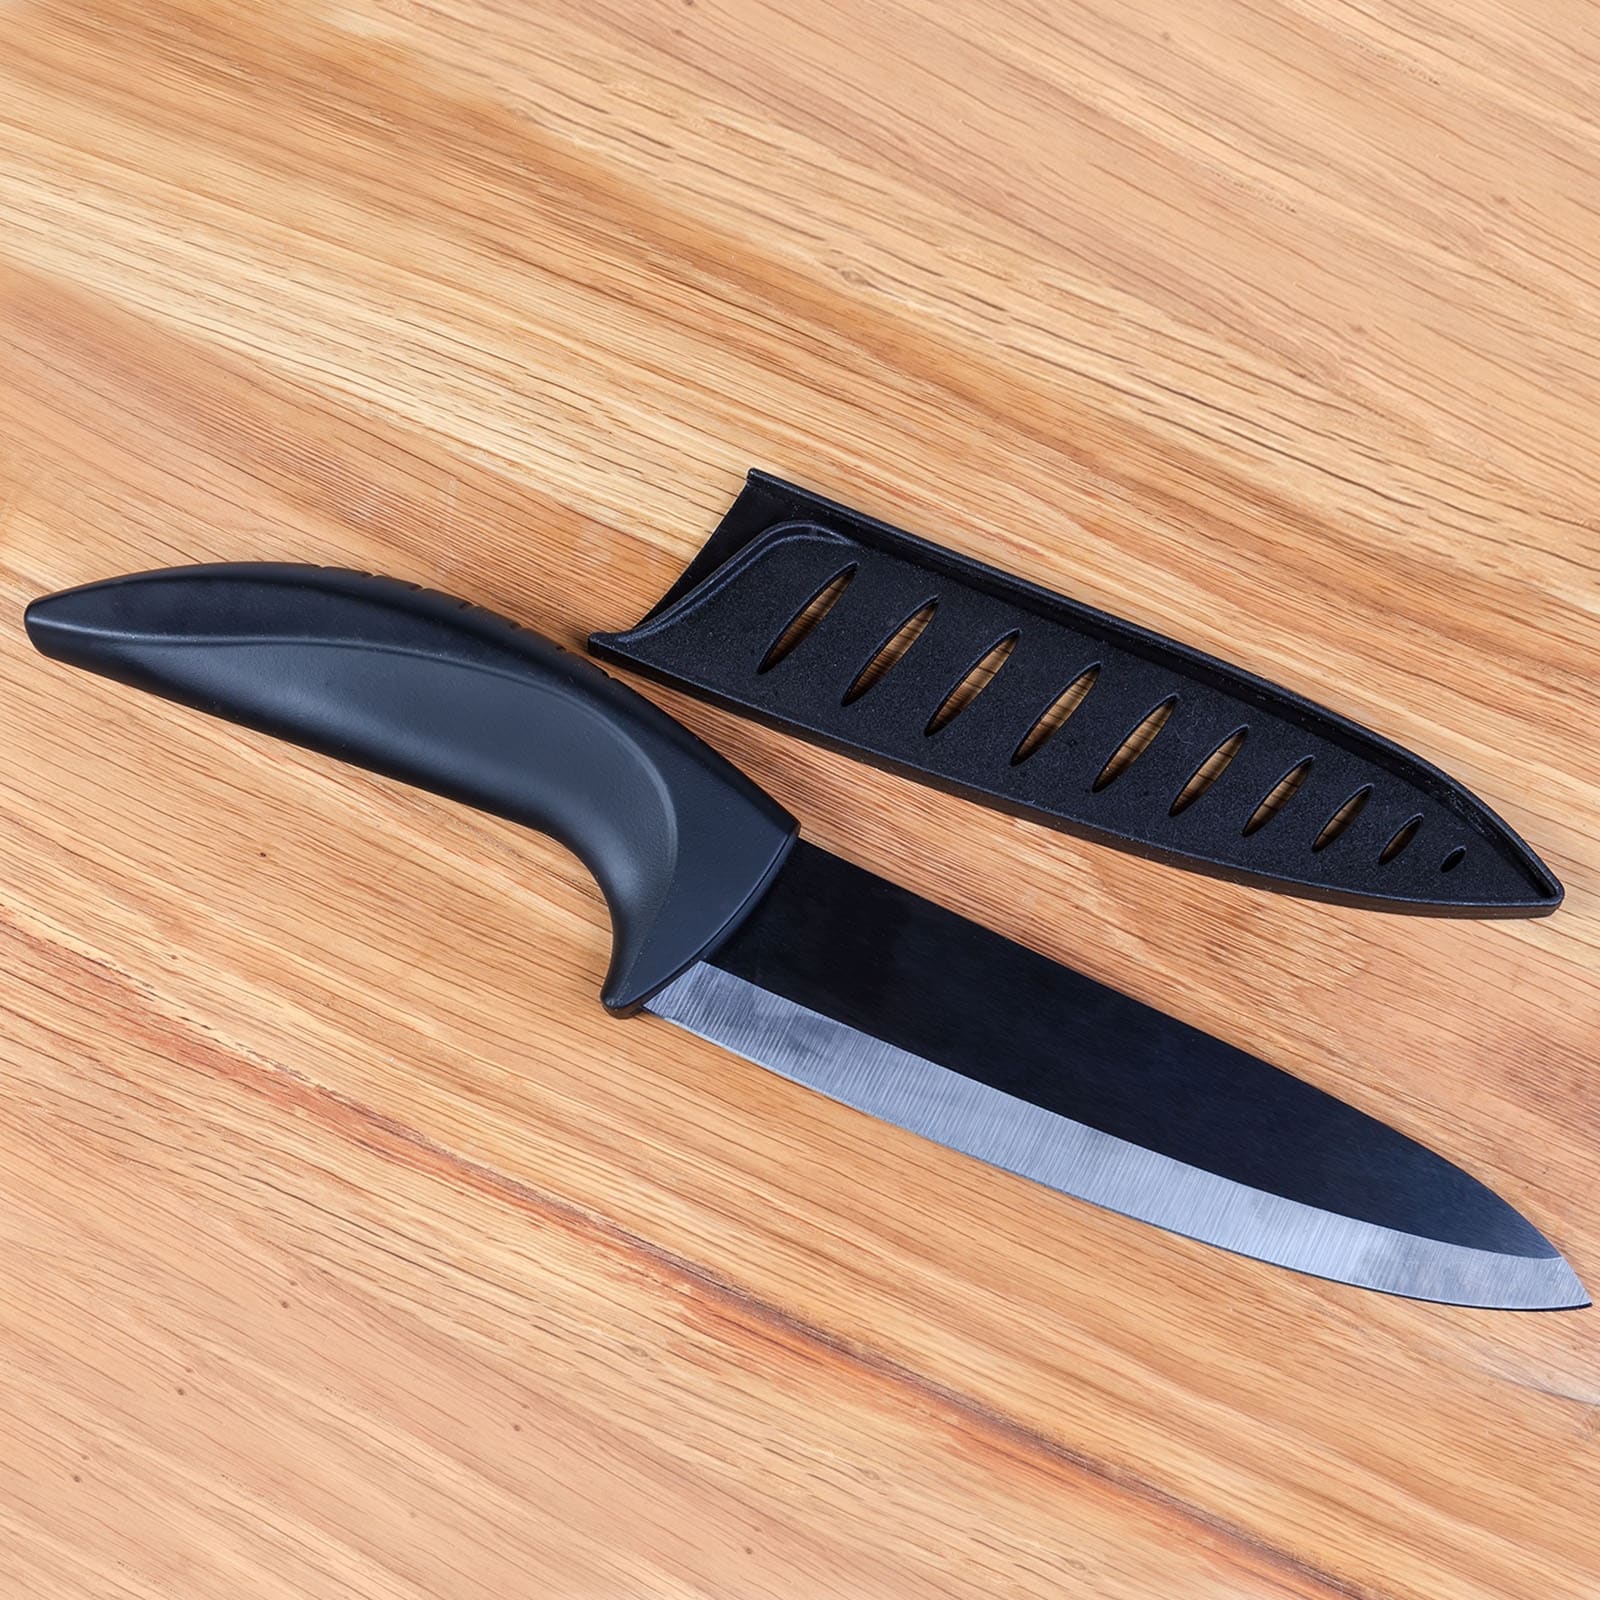 8 inch ceramic knives with sheath